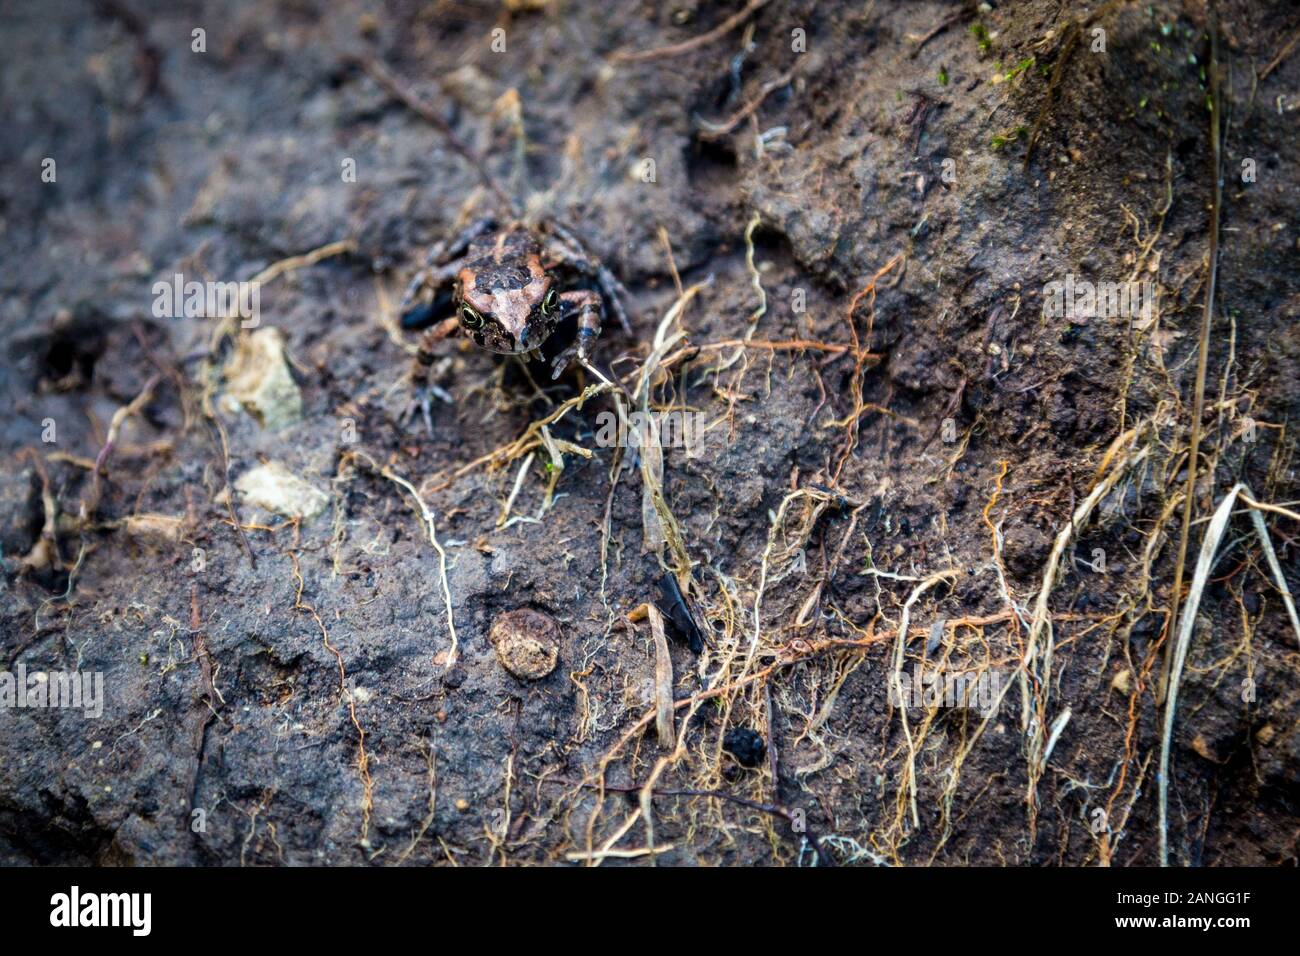 A well camouflaged tiny frog with a brown-black pattern is sitting on muddy soil, South Africa Stock Photo